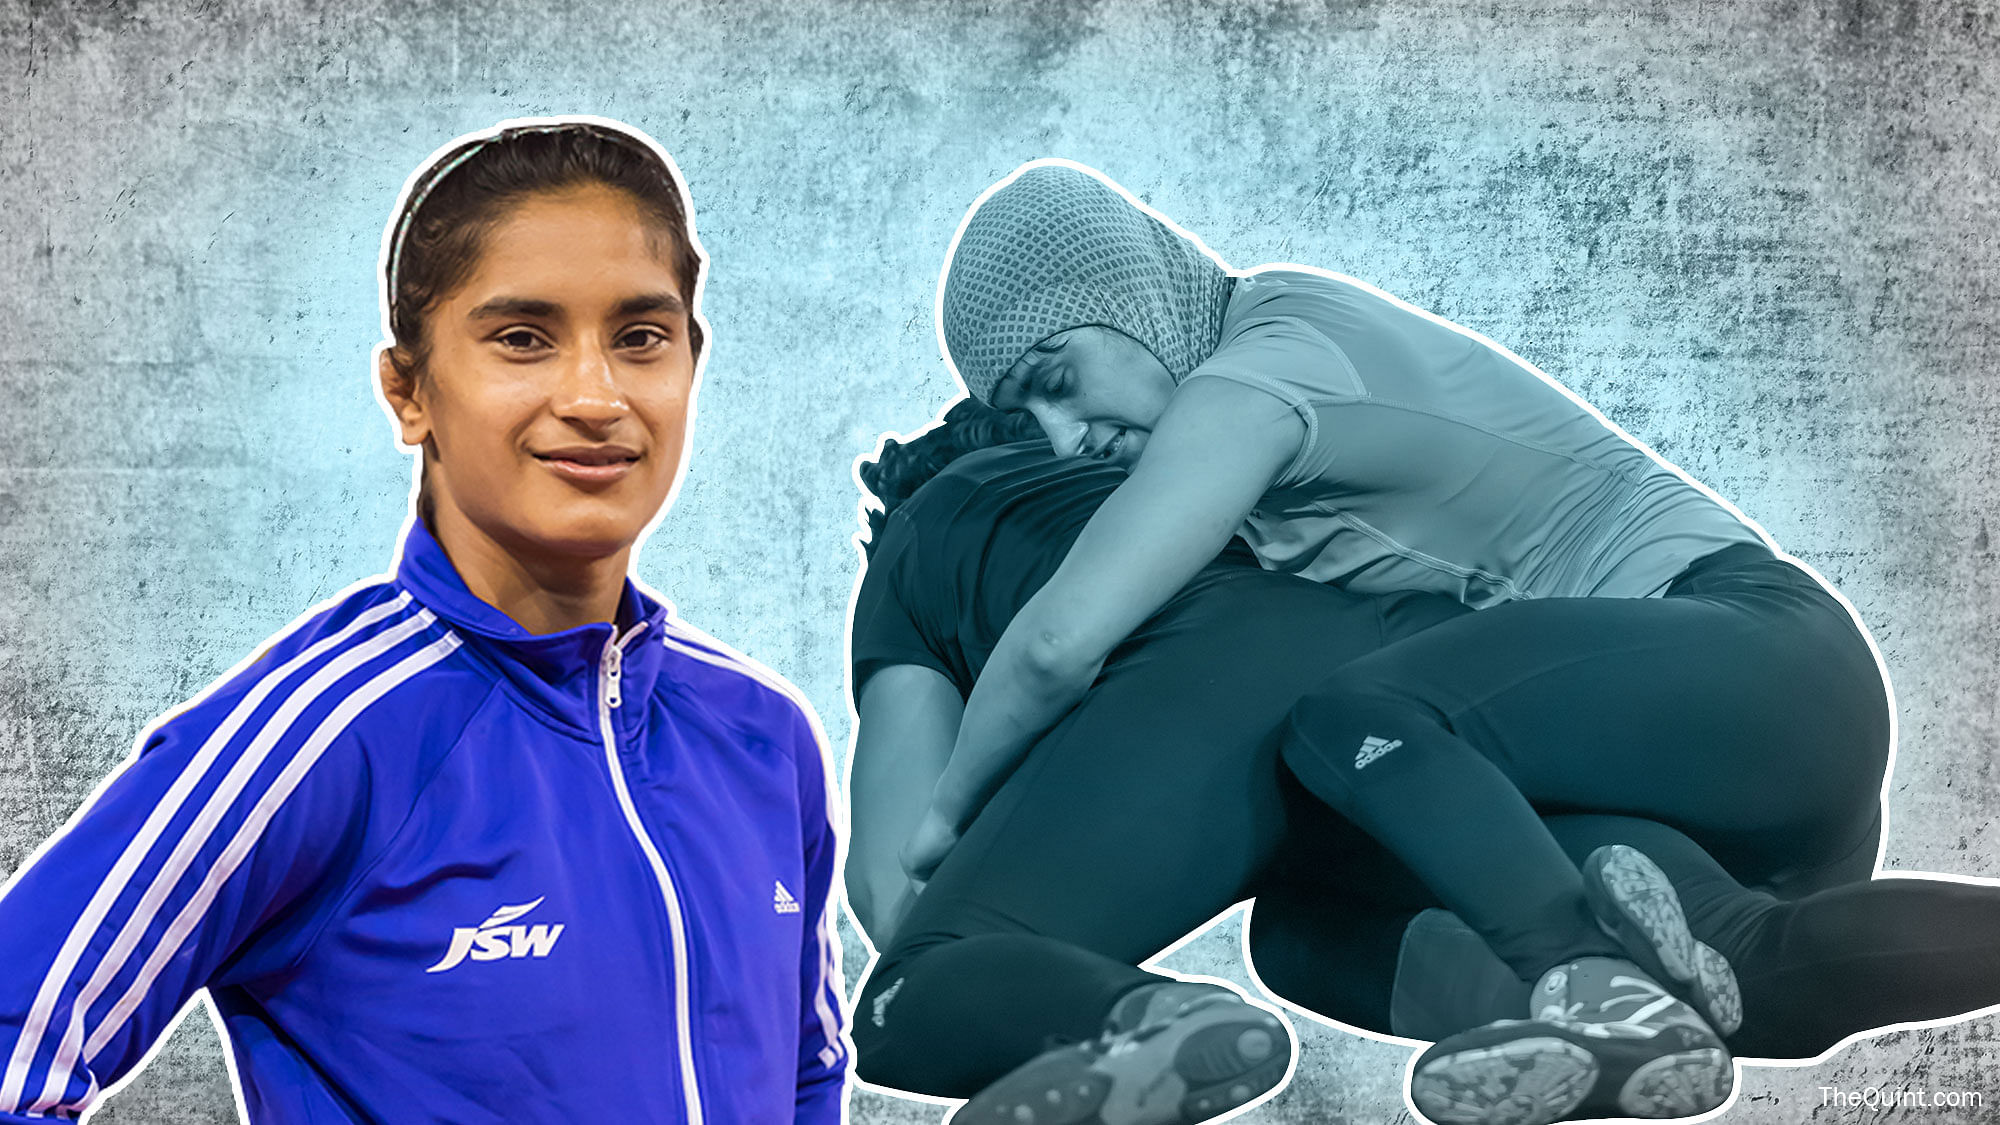 Vinesh Phogat will be in action on Wednesday night. (Photo: JSW)